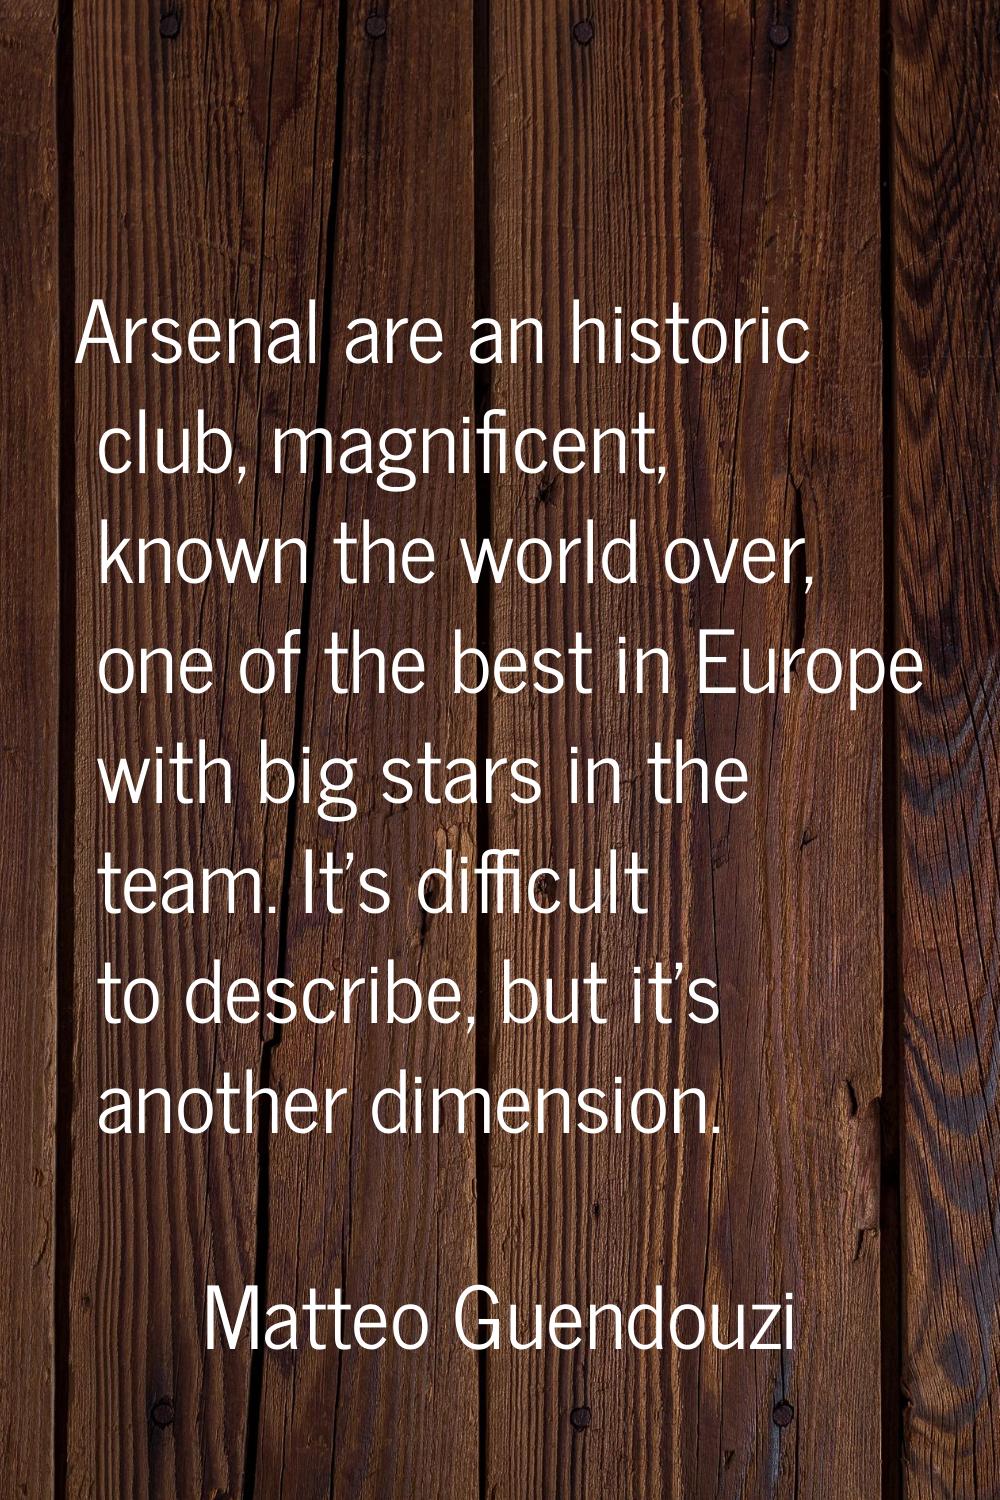 Arsenal are an historic club, magnificent, known the world over, one of the best in Europe with big